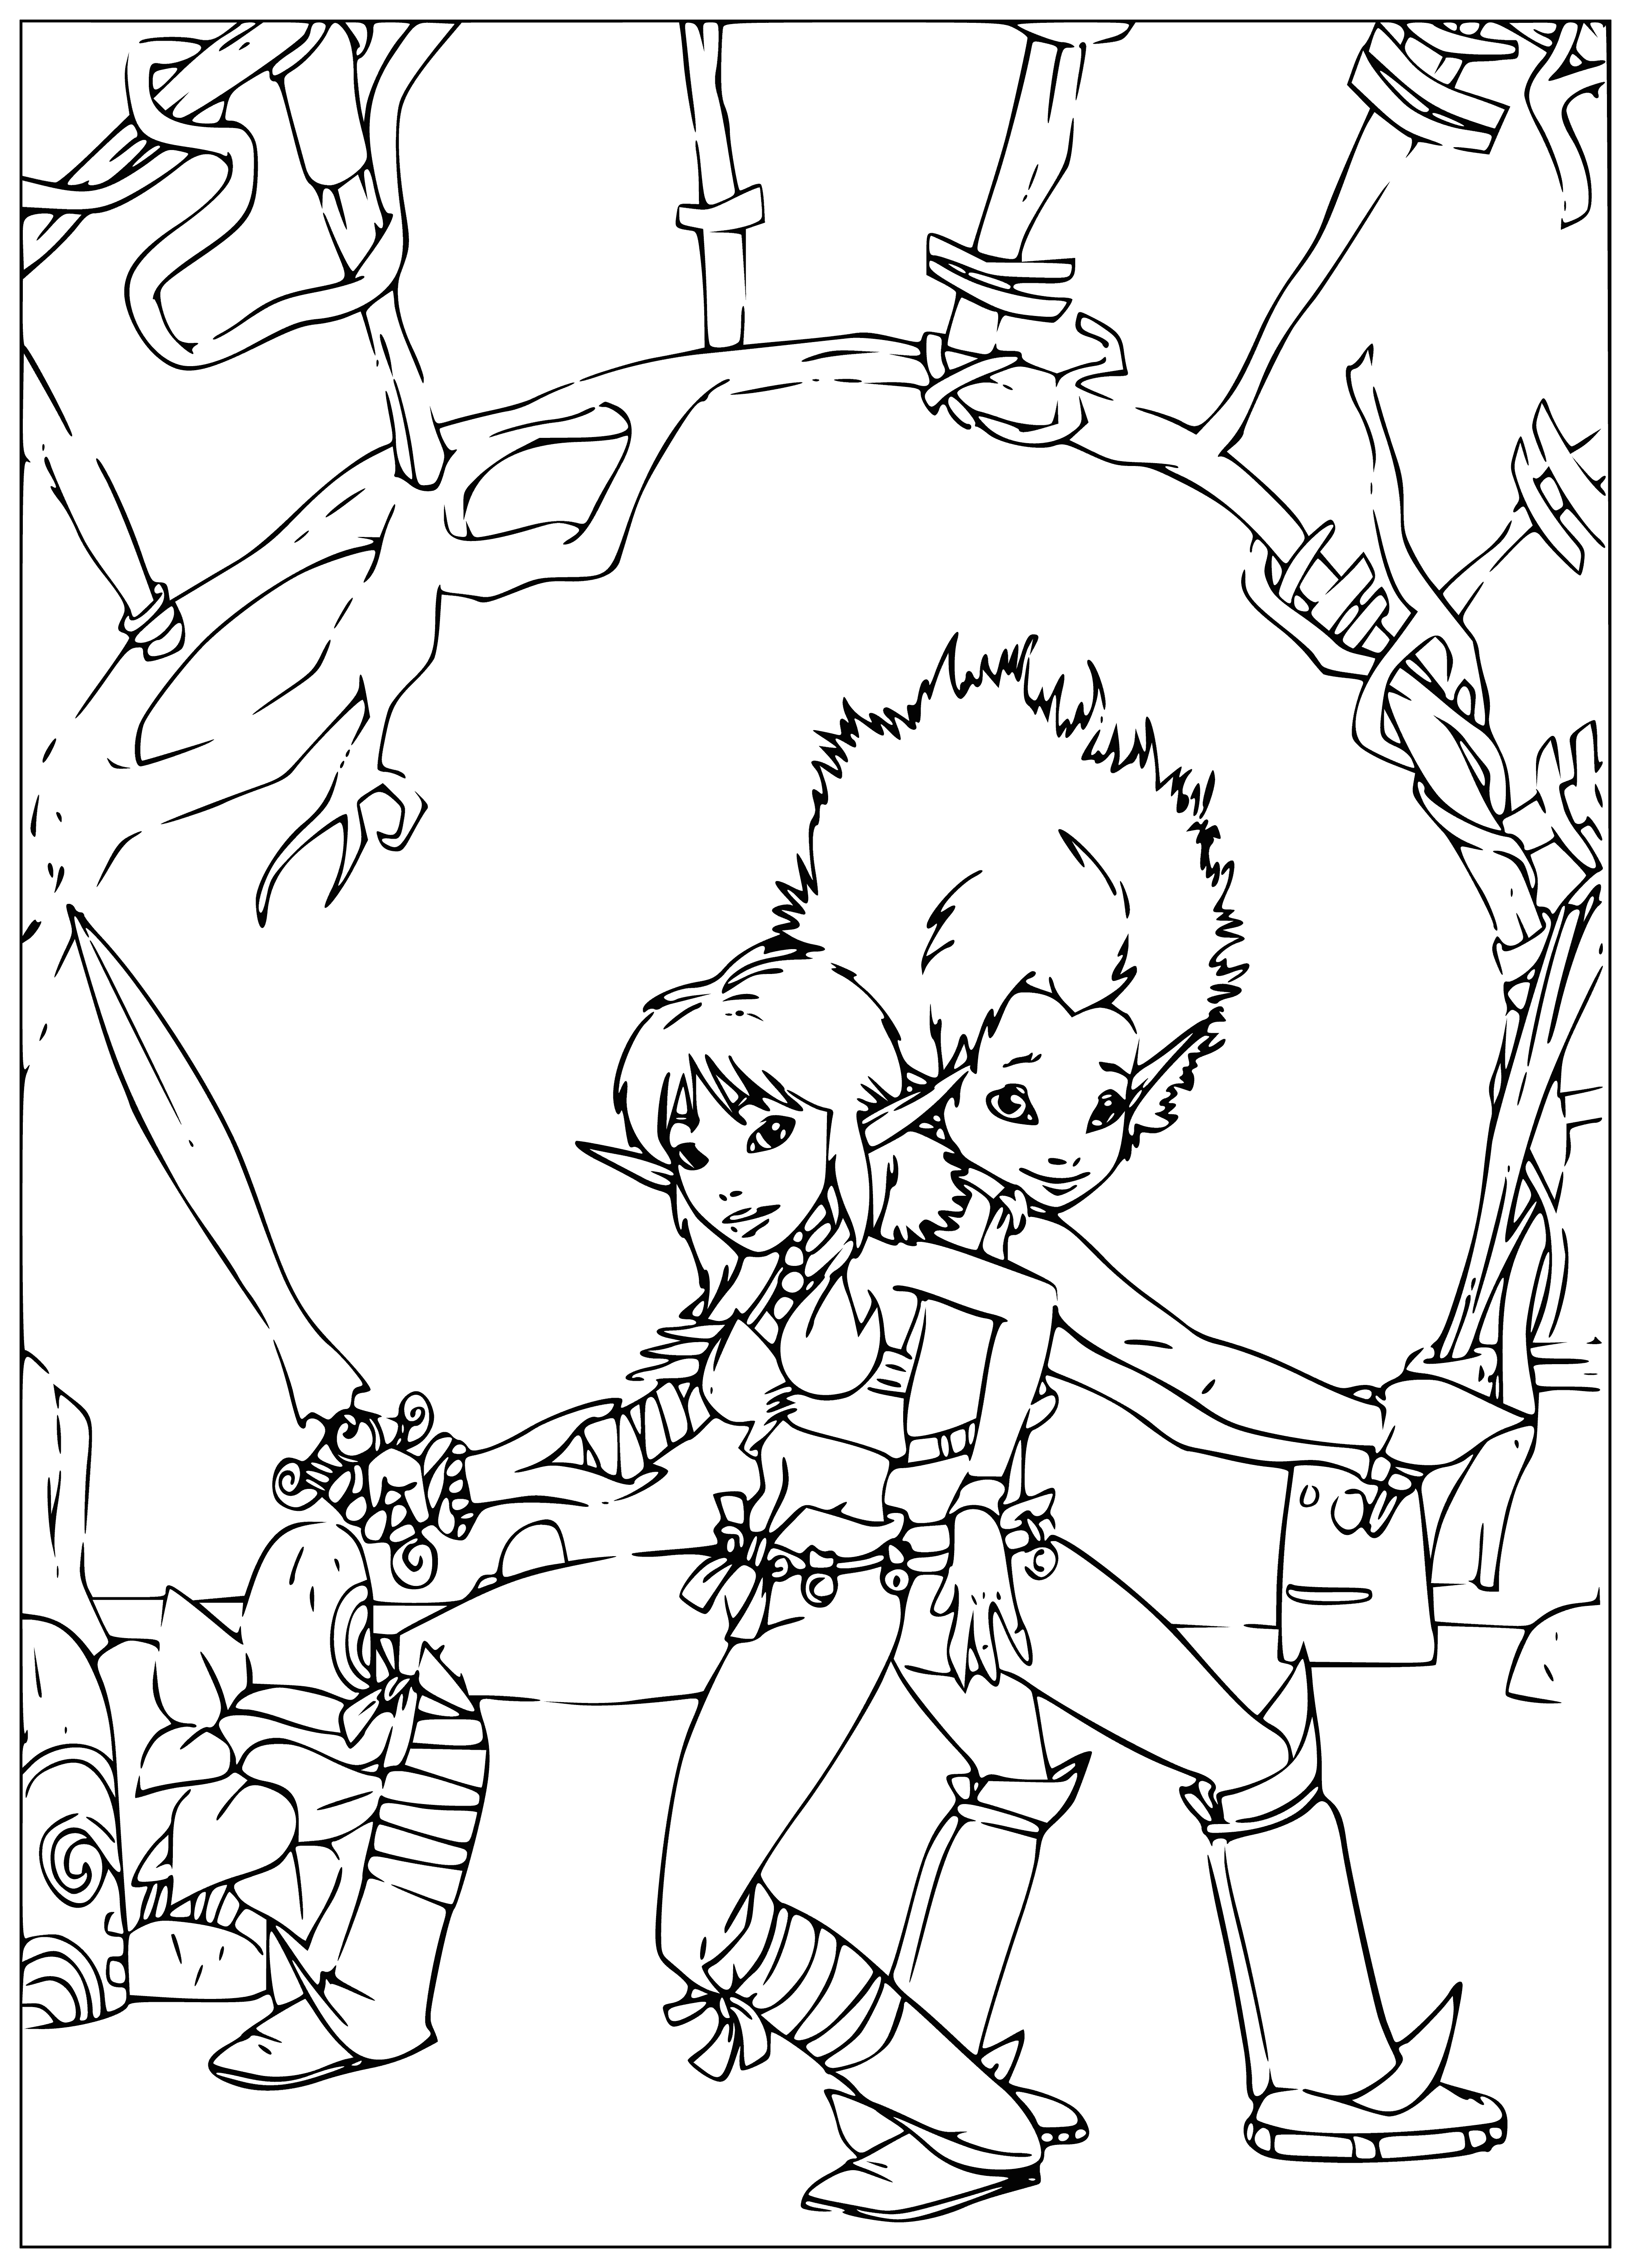 Selenia and Arthur coloring page